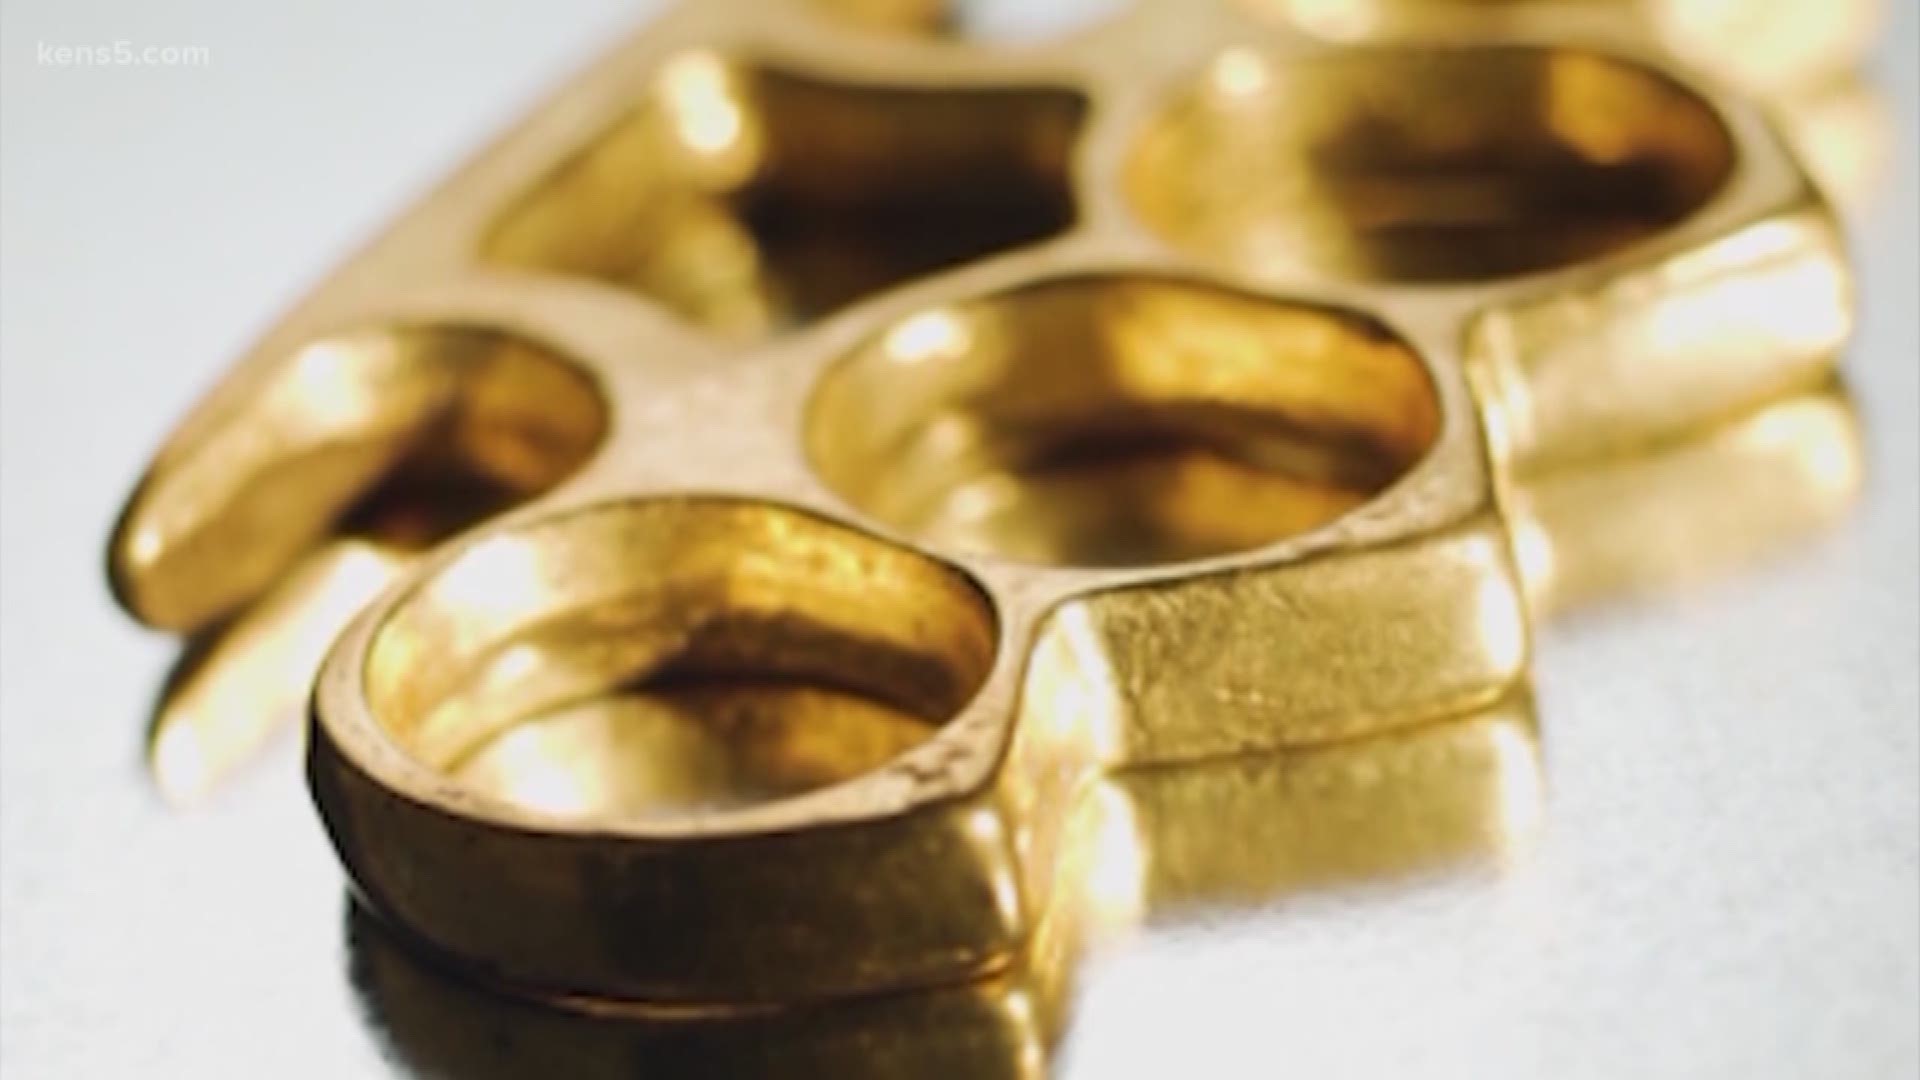 Brass knuckles were once deemed dangerous, but they are now legal to carry for self-defense.